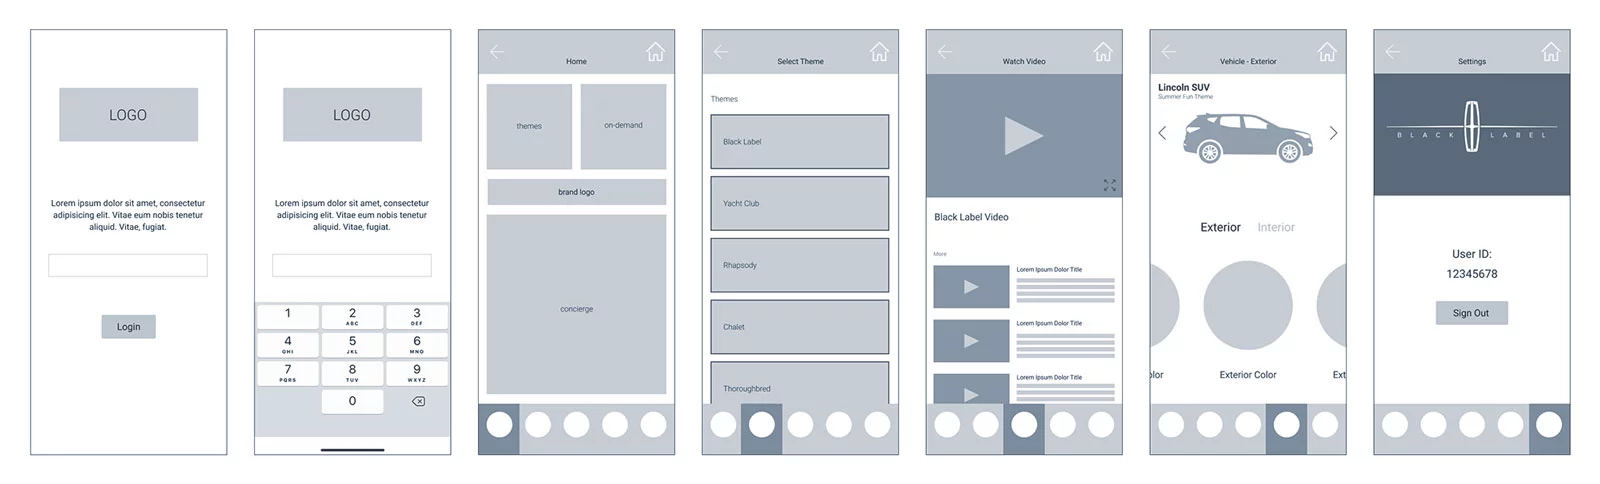 A lineup of 7 wireframe screens showing the flow of the new app design for Black Label